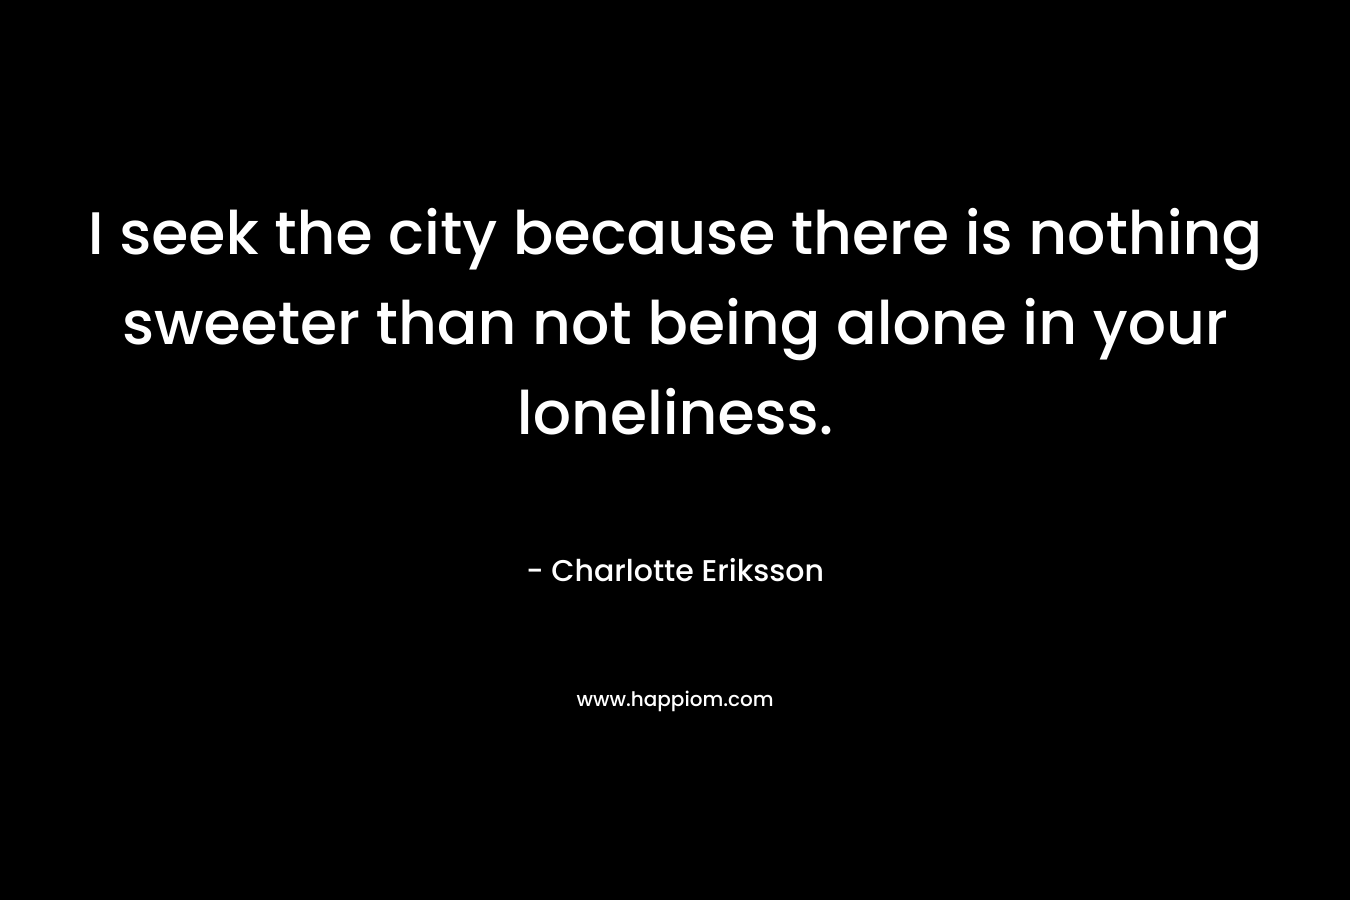 I seek the city because there is nothing sweeter than not being alone in your loneliness.